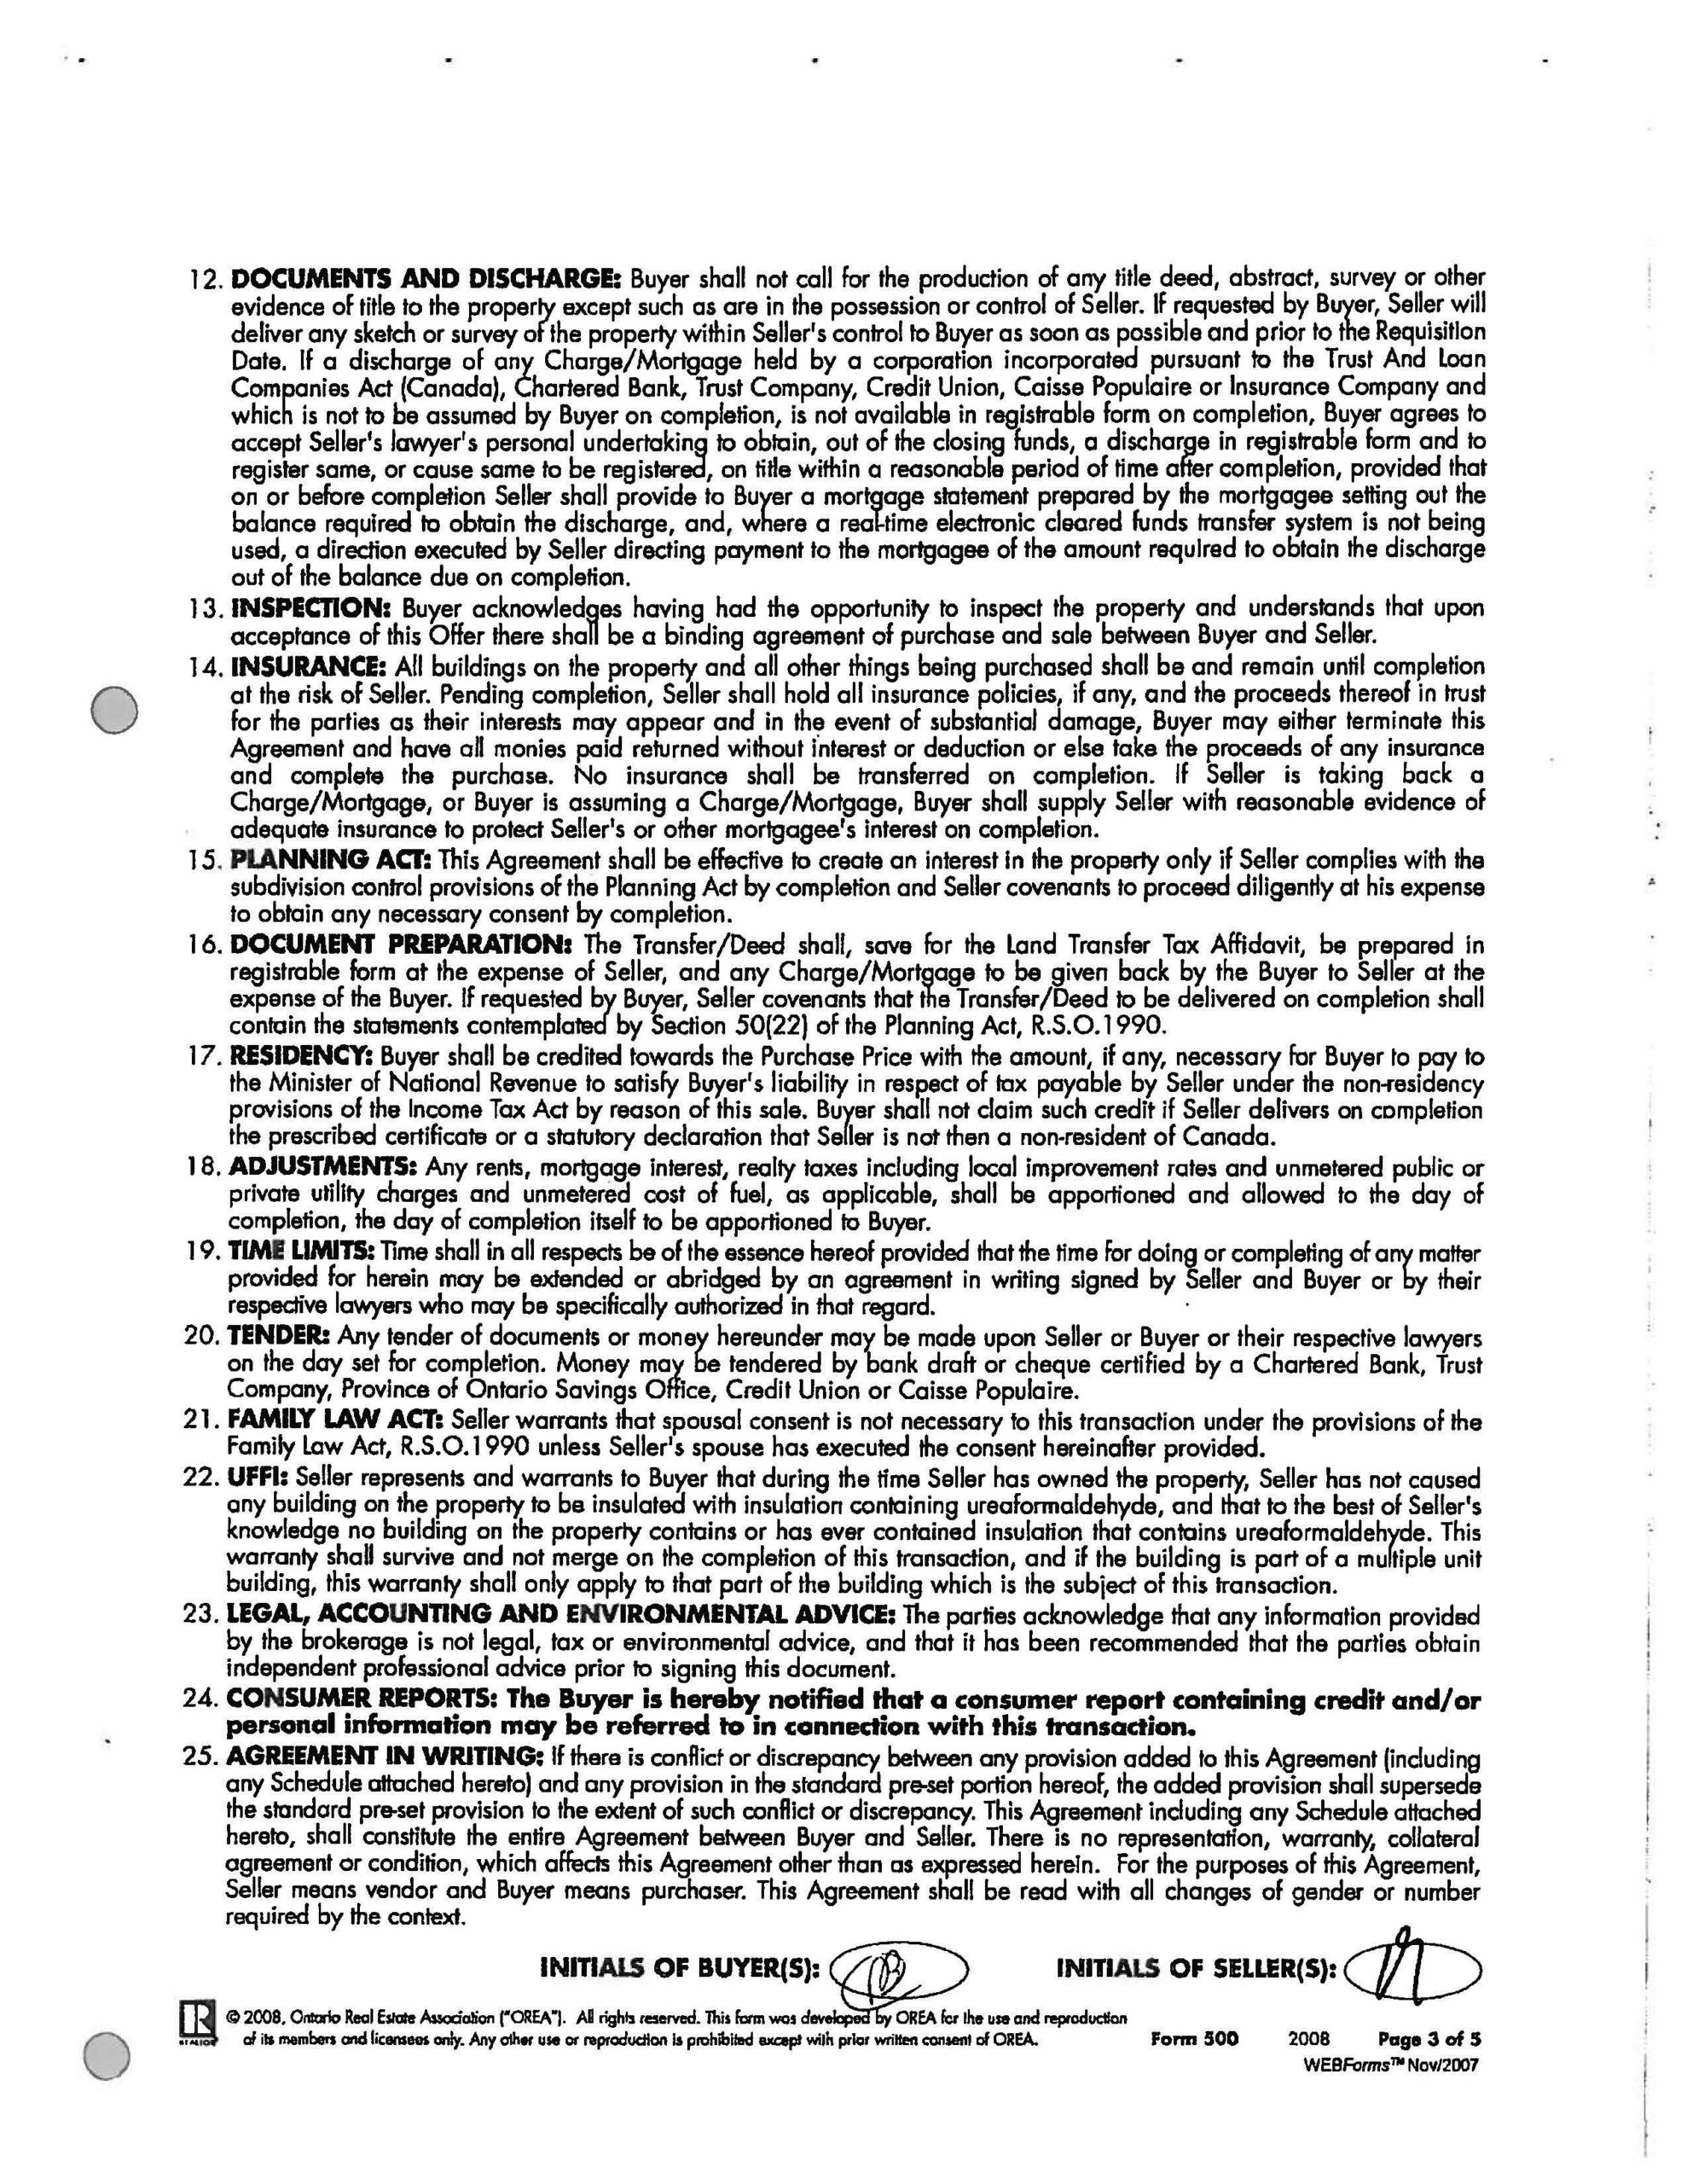 Agreement of Purchase and Sale document page 04